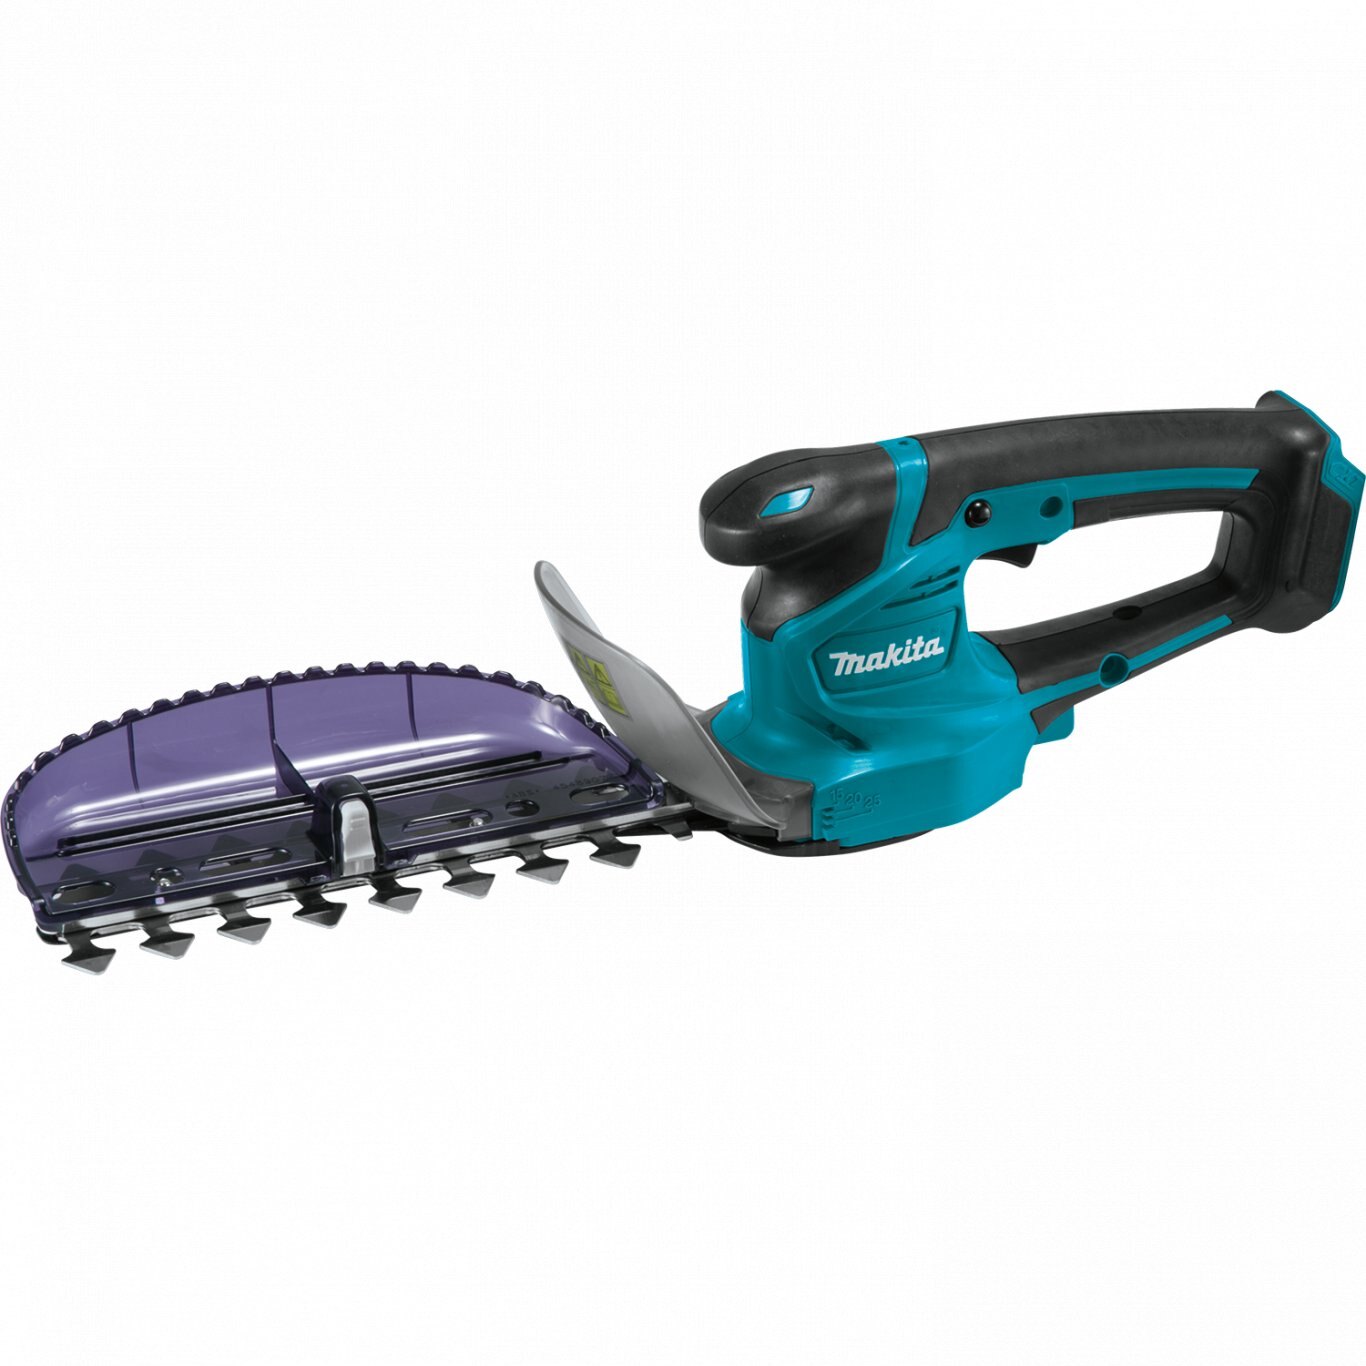 Makita 12V max CXT® Lithium?Ion Cordless Hedge Trimmer, Tool Only